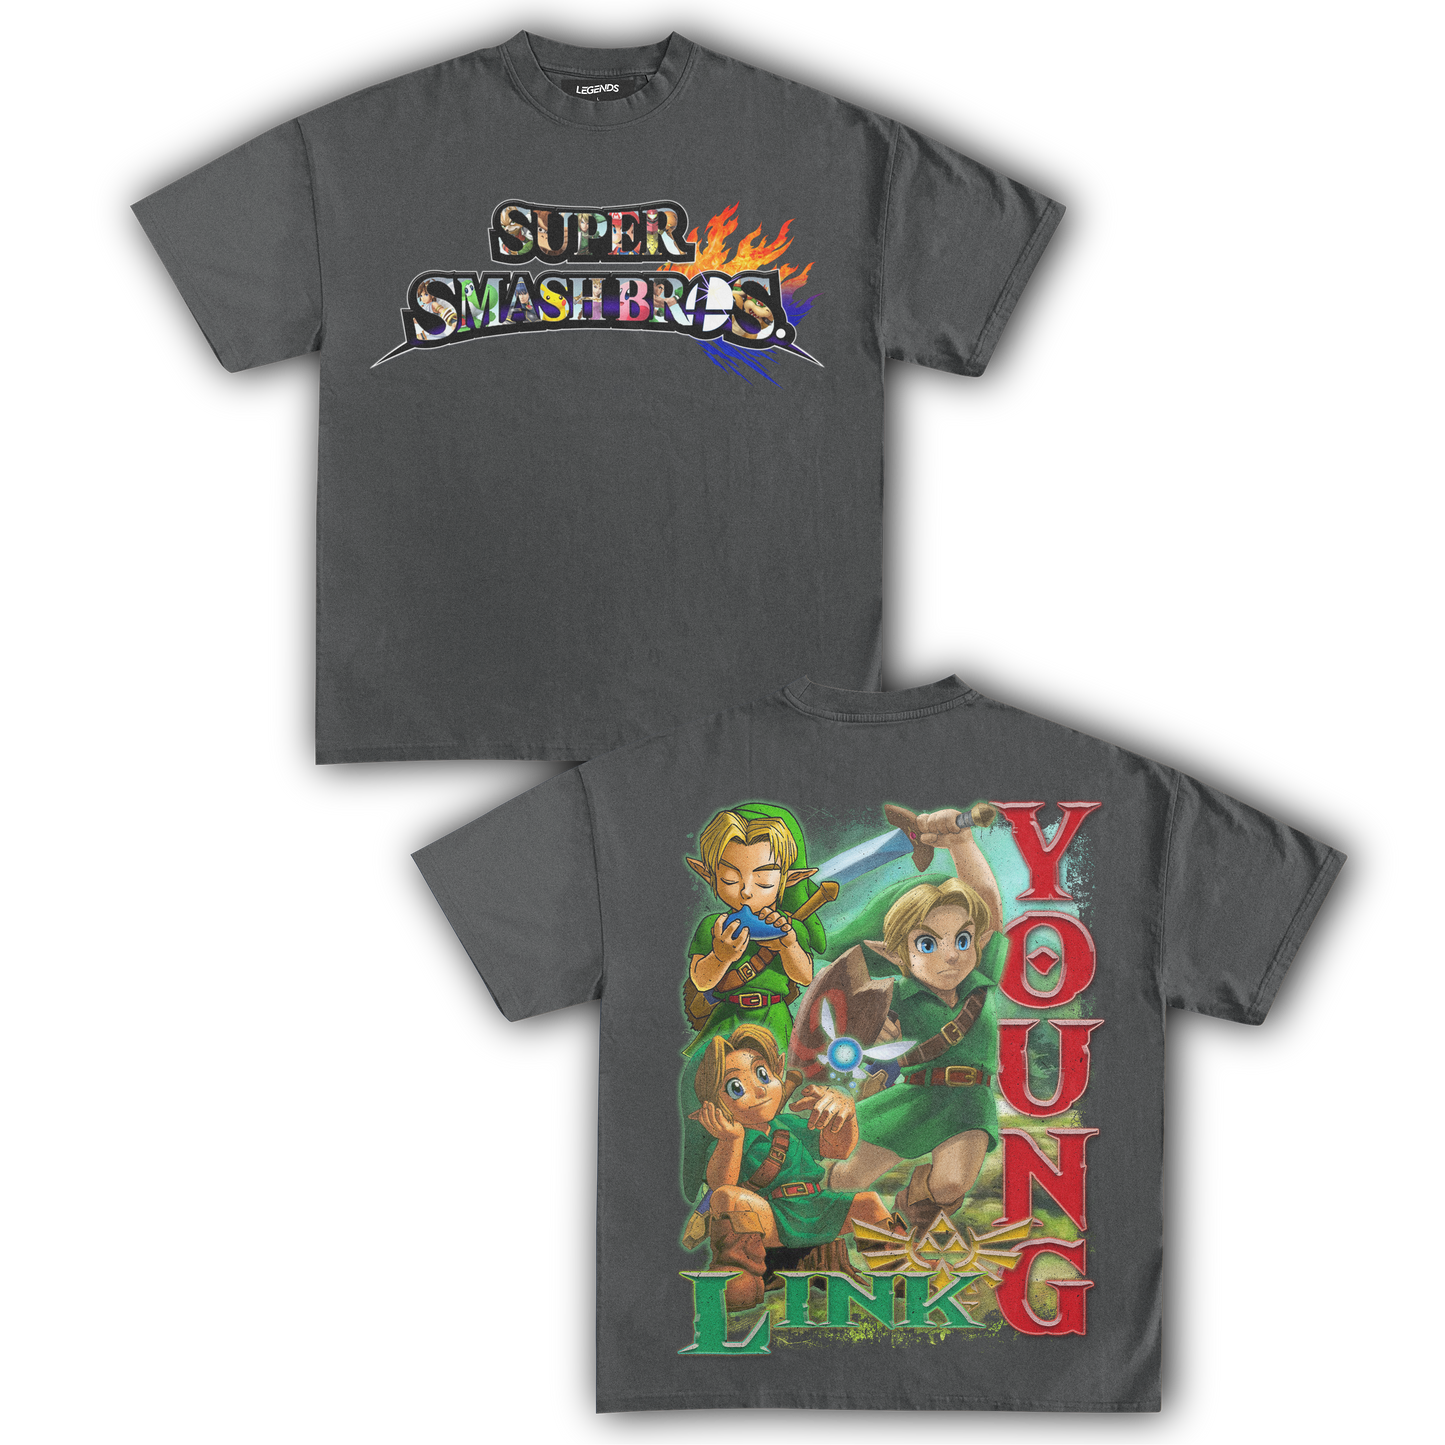 SUPER SMASH BROS YOUNG LINK TEE (Double)